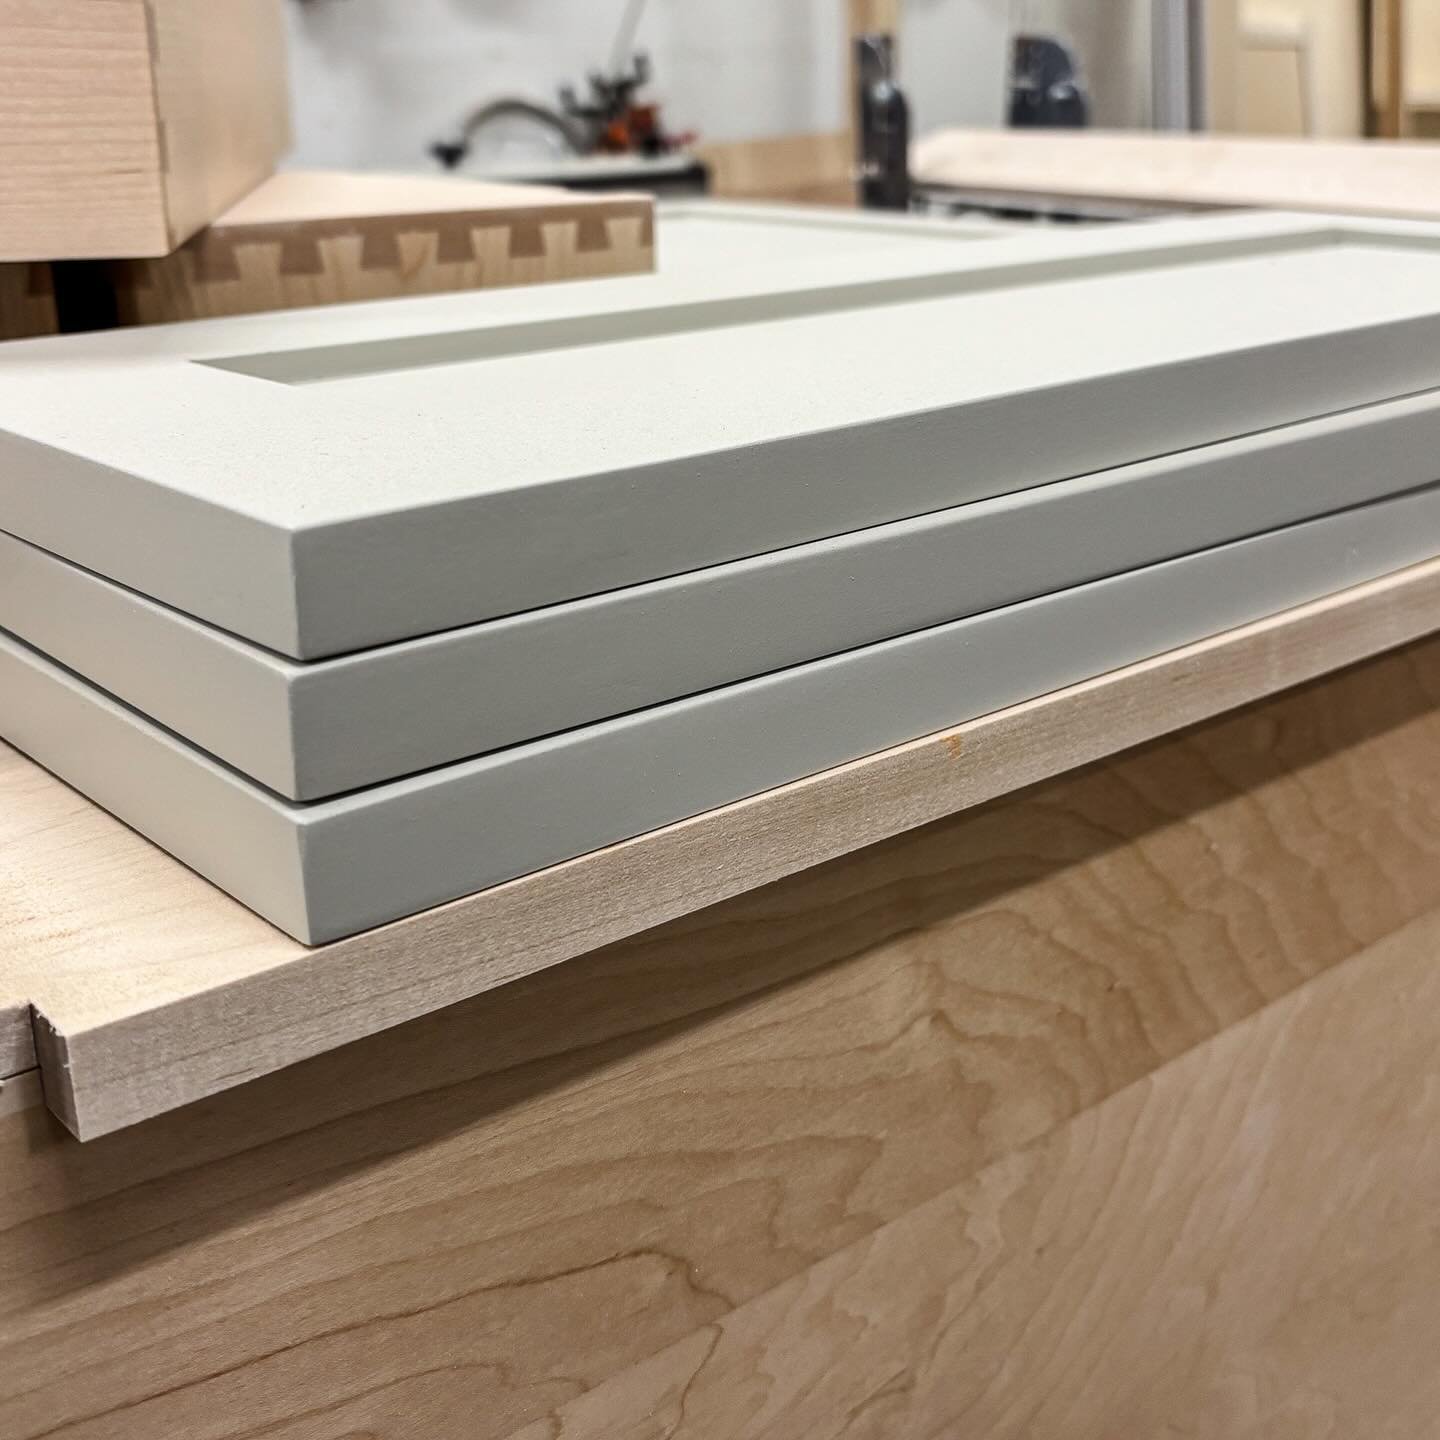 Meanwhile in our cabinet shop&hellip;we&rsquo;re wrapping up one of our favorite projects and we can&rsquo;t wait to share it with you! 📸

#wallawallainteriordesign#wallawallacabinets#customcabinets#cbcabinets#paintedcabinets#interiordesignwallawall